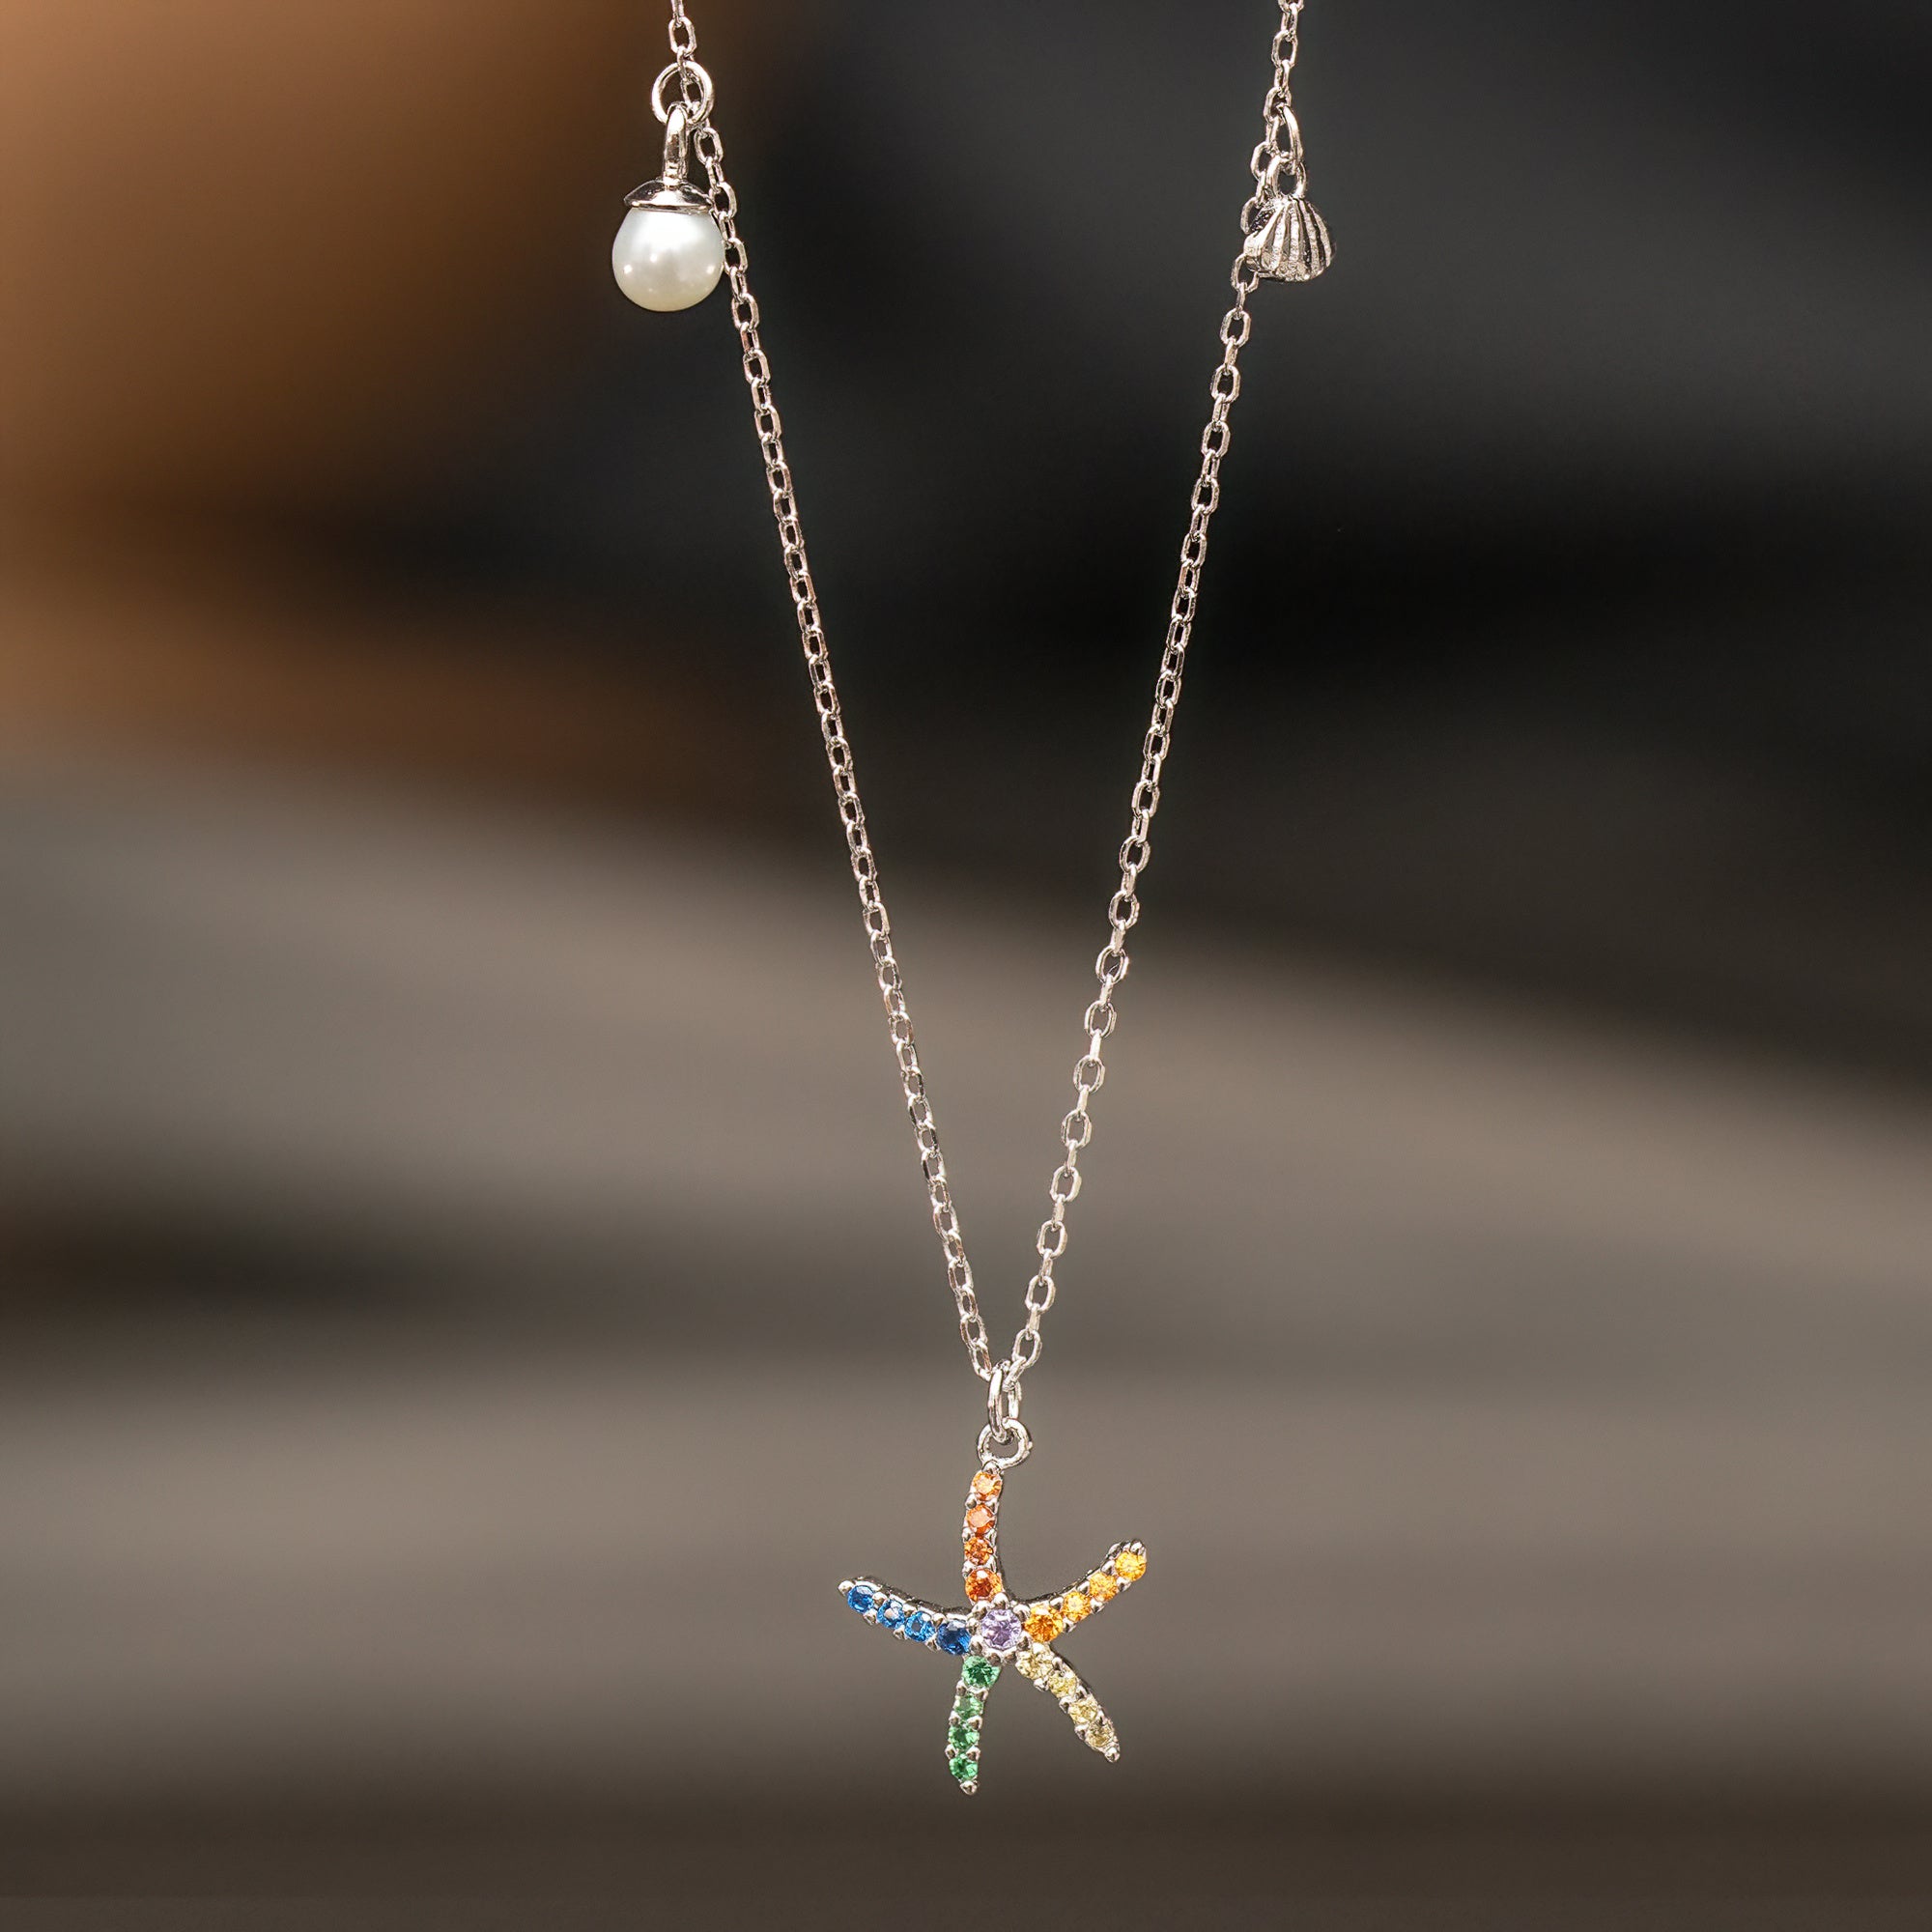 Rainbow Starfish [Anuenue 'Rainbow' Collection] Sterling Silver